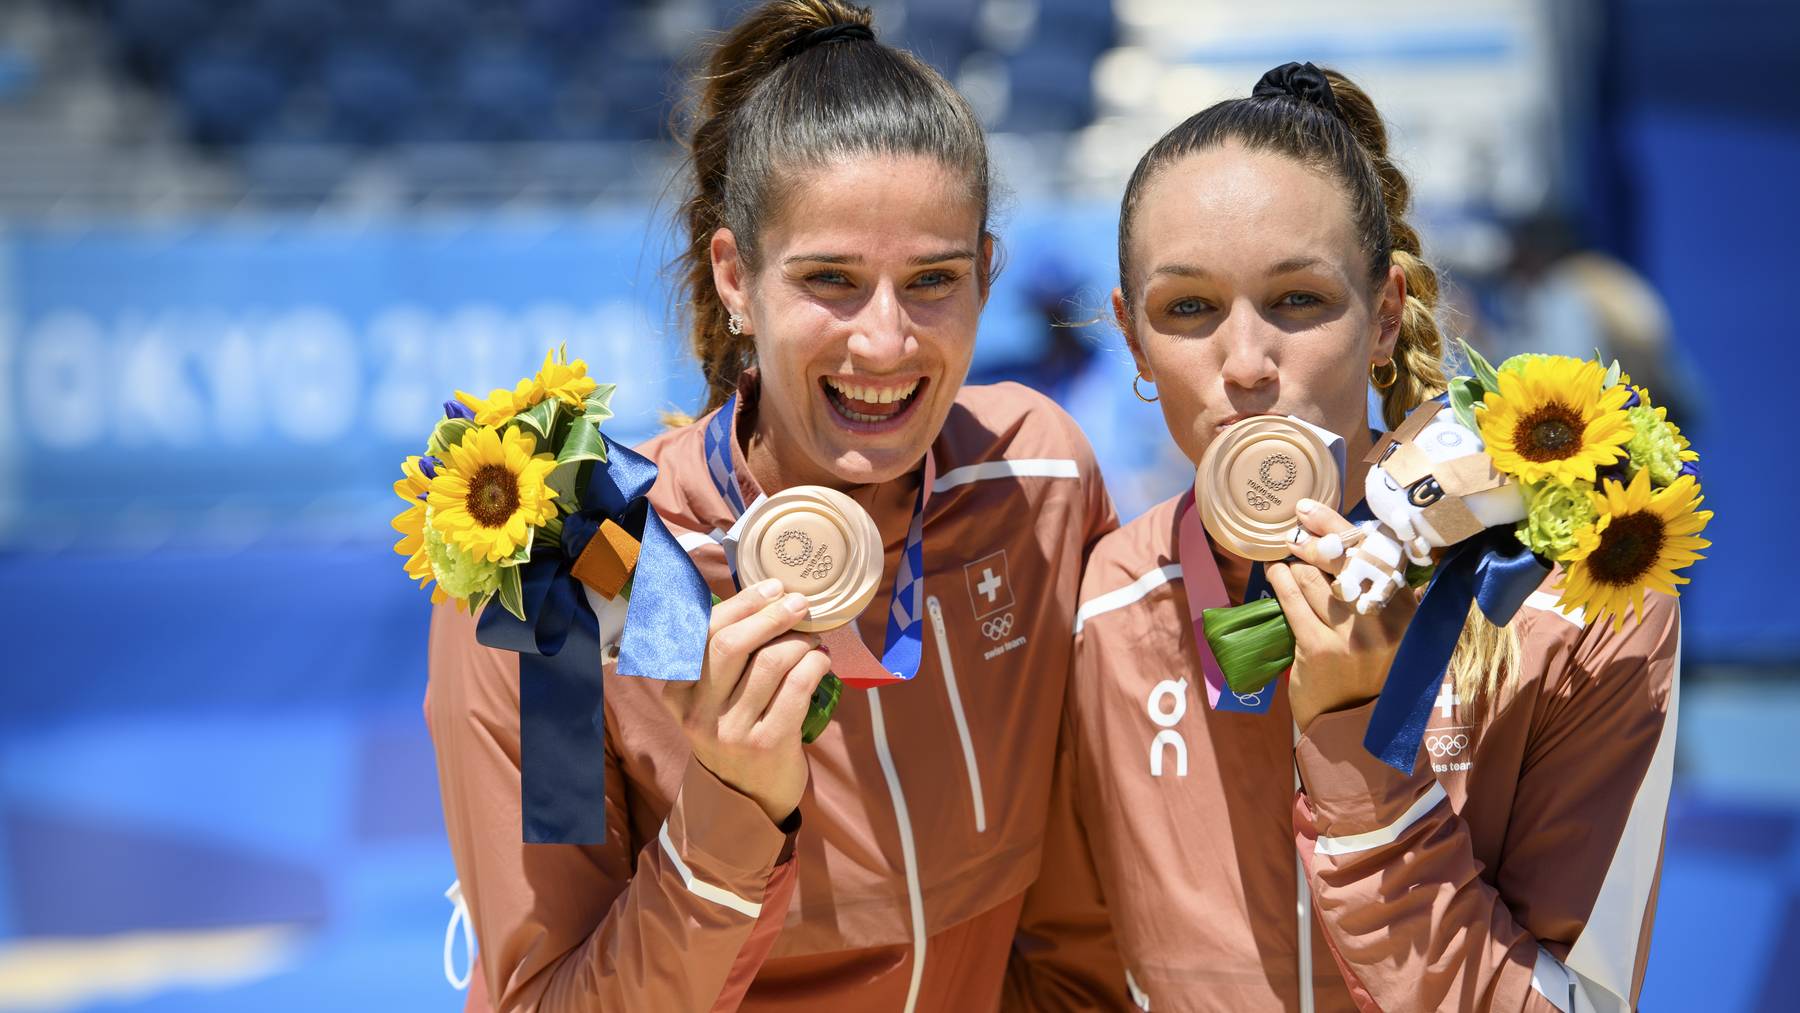 Bronze medal winner Anouk Verge-Depre, right, and Joana Heidrich, left, of Switzerland celebrate with they medal during the victory ceremony after the women's beach volleyball bronze medal game against Tina Graudina and Anastasija Kravcenoka of Latvia at the 2020 Tokyo Summer Olympics in Tokyo, Japan, on Friday, August 06, 2021